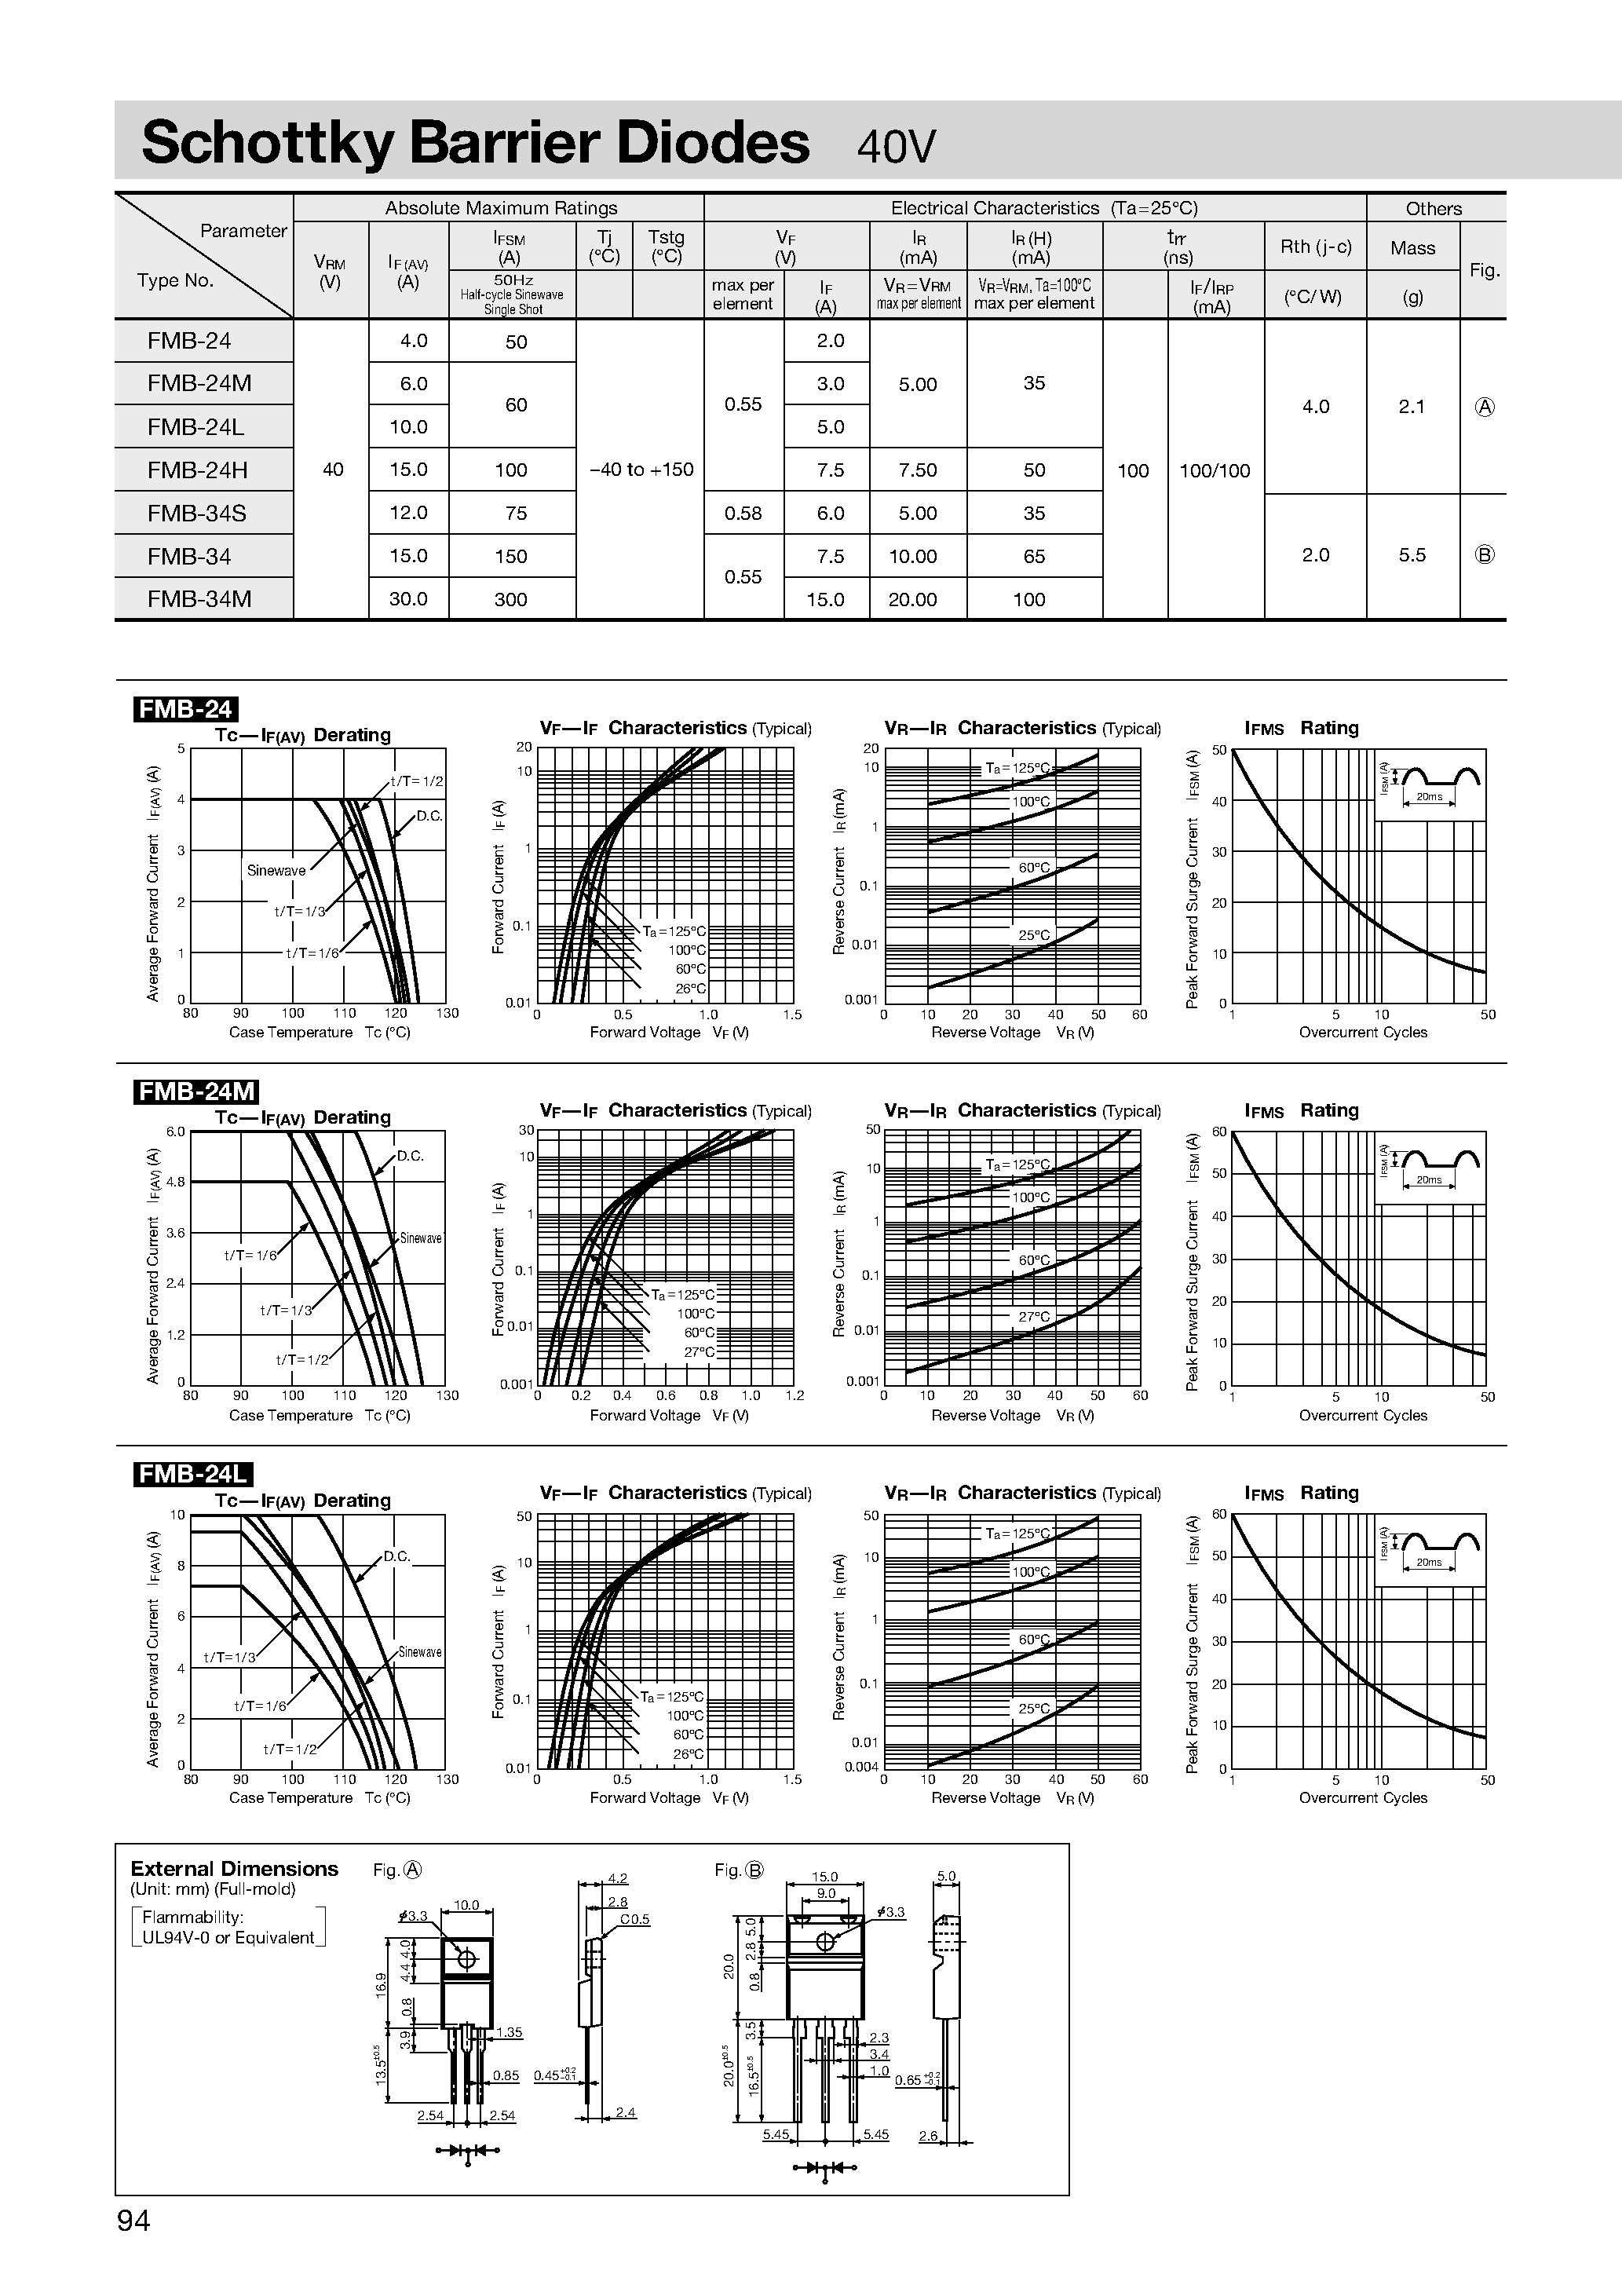 Datasheet FMB-24M - Schottky Barrier Diodes 40V page 1